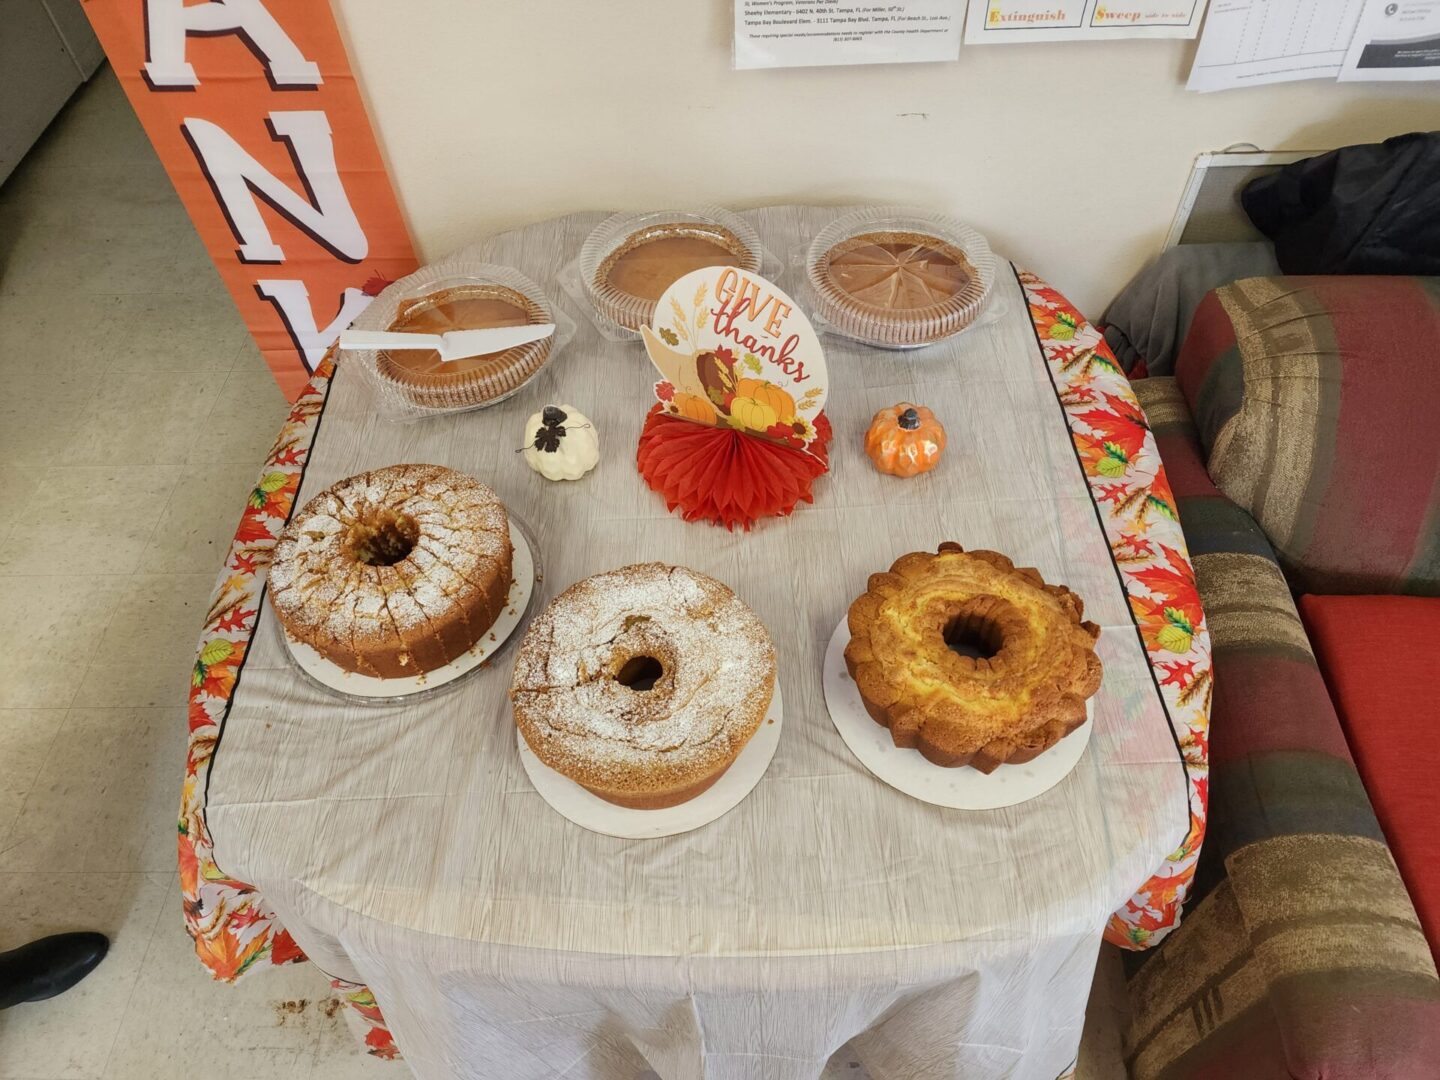 Cakes served on a table